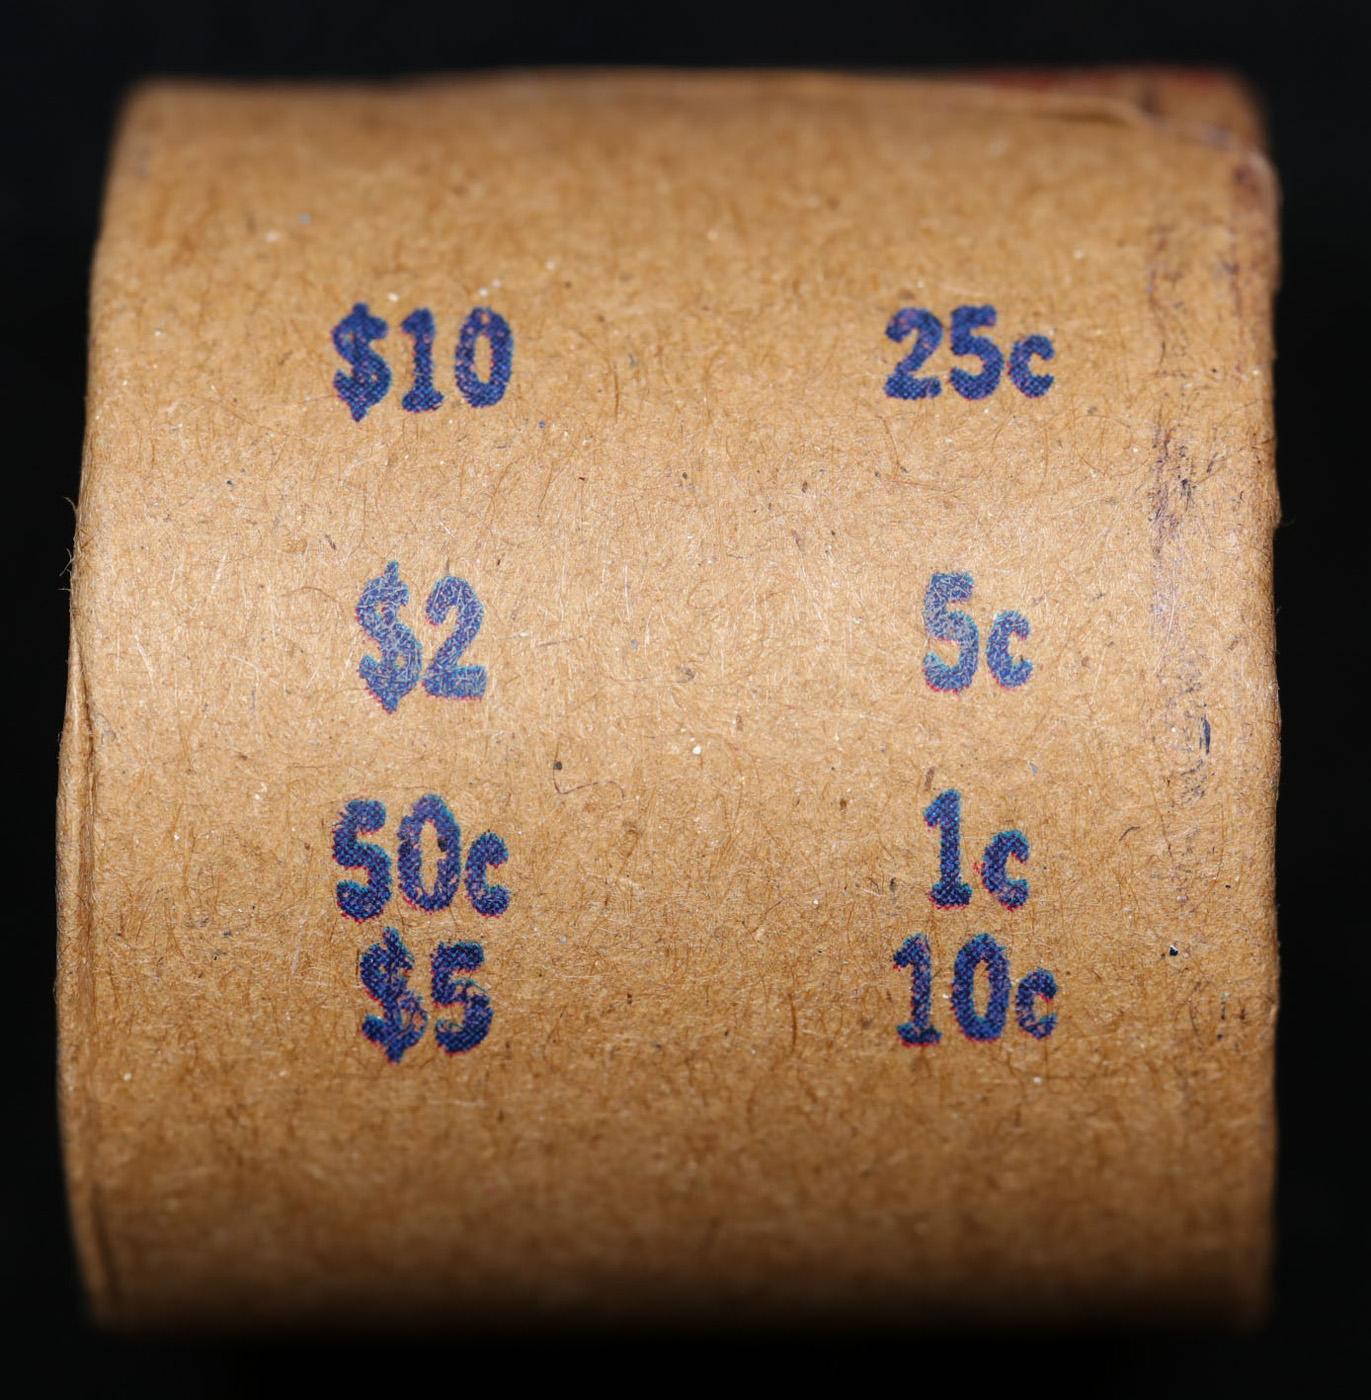 Must See! Covered End Roll! Marked "Unc Peace Standard"! X10 Coins Inside! (FC)